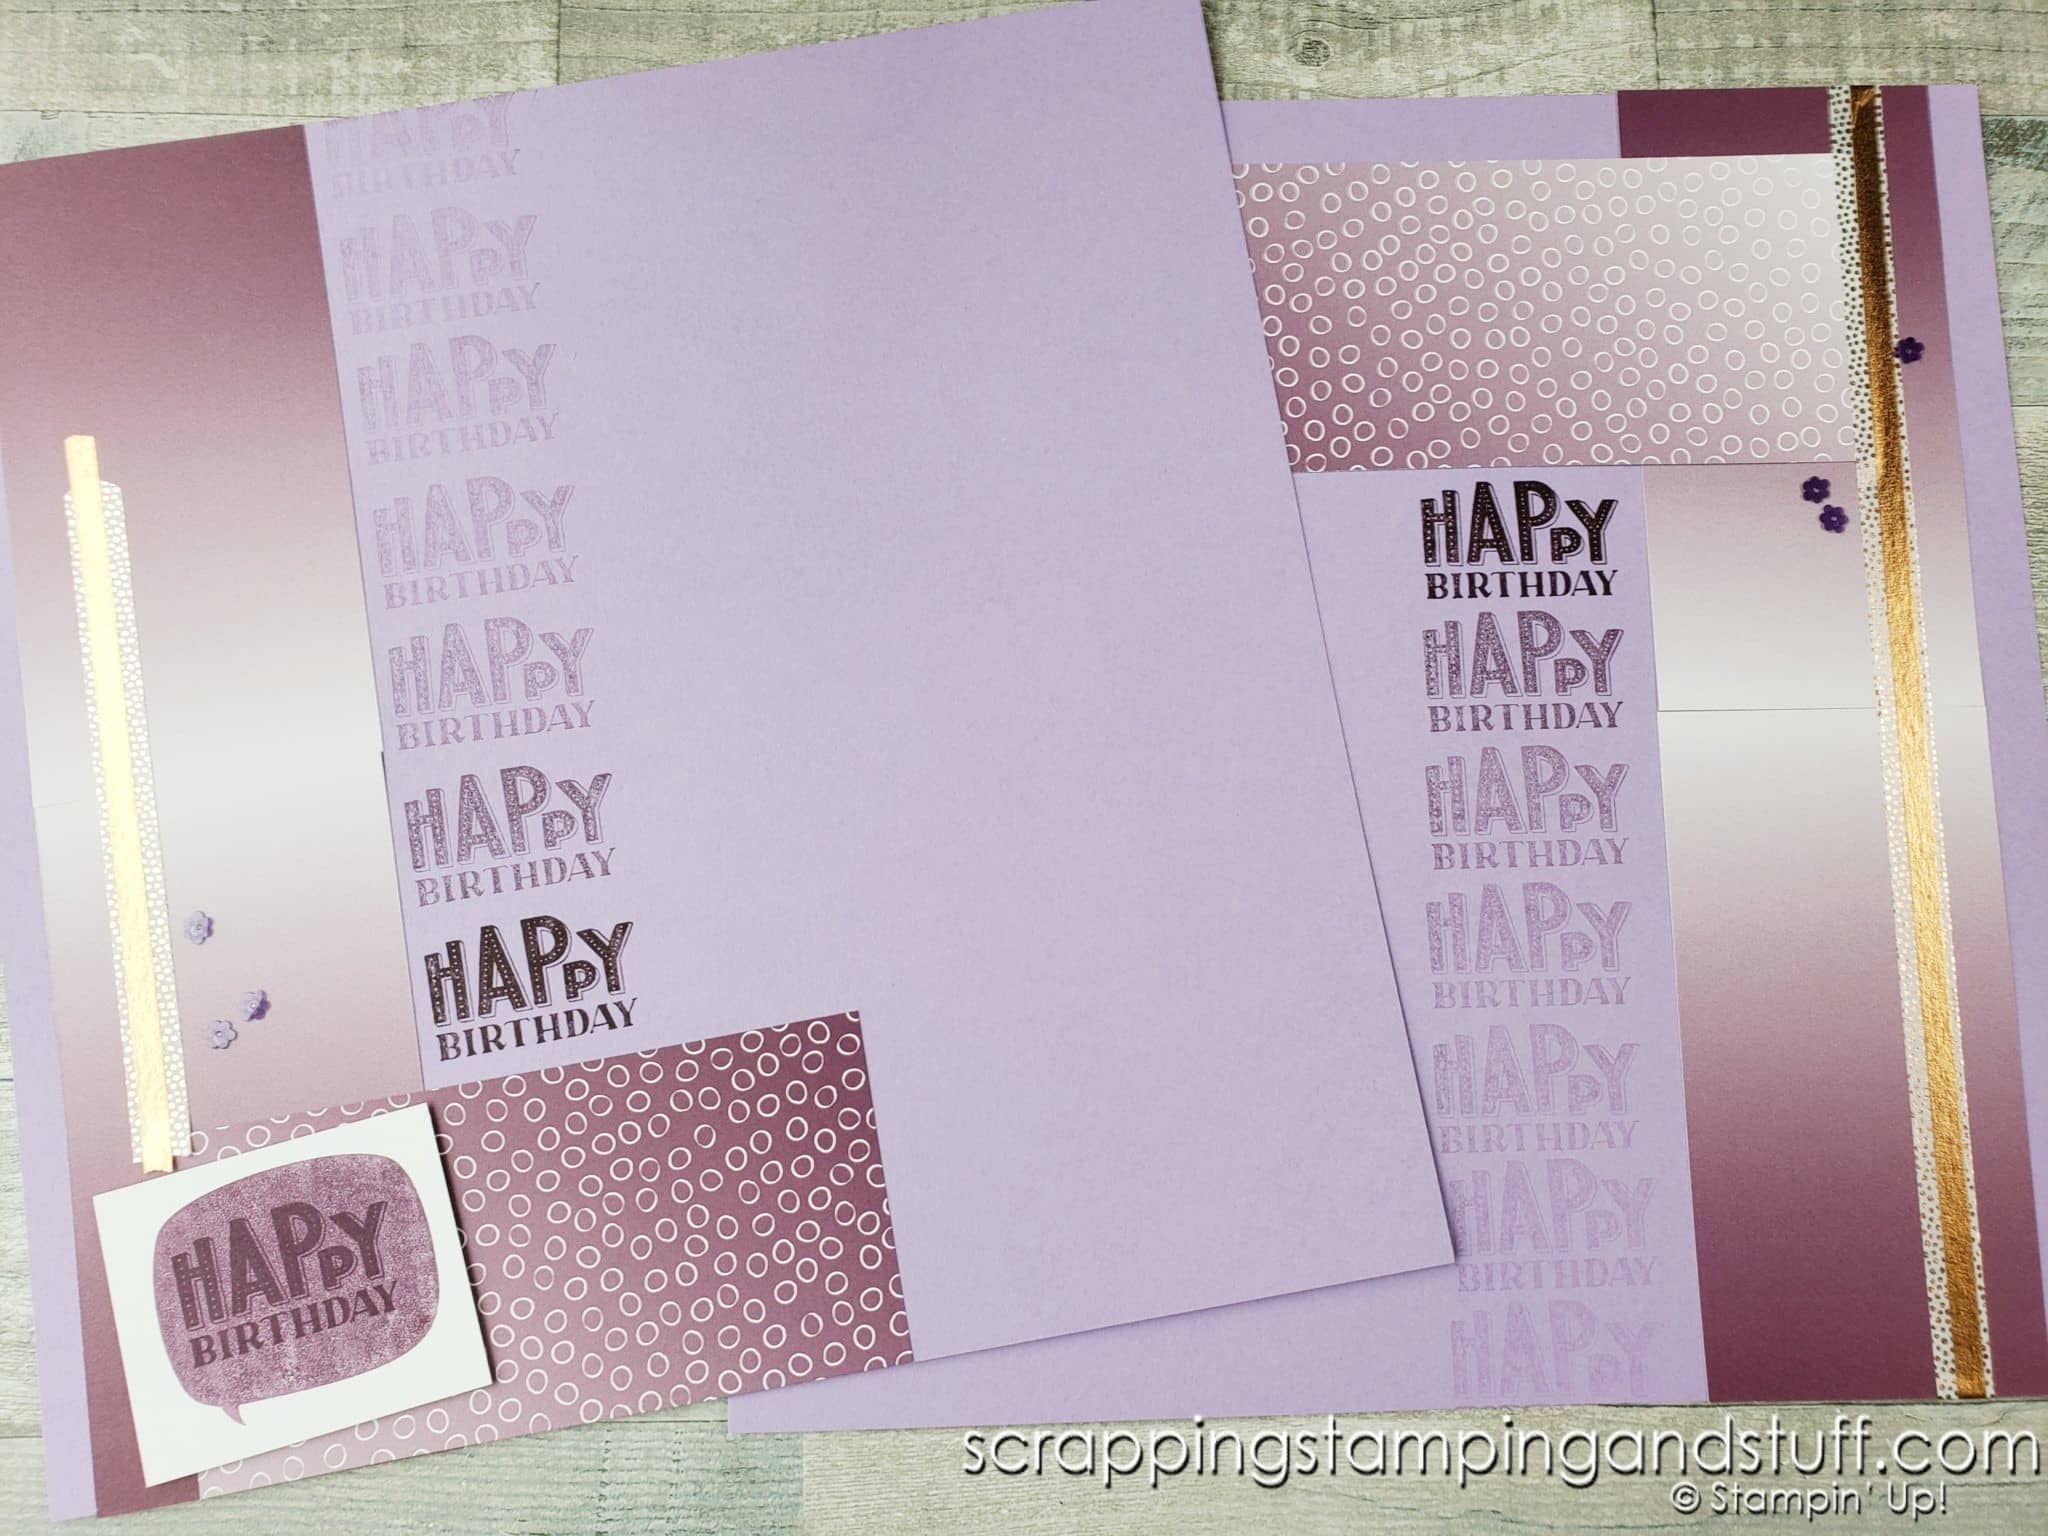 11 Stamped Scrapbooking Layouts To Inspire You!